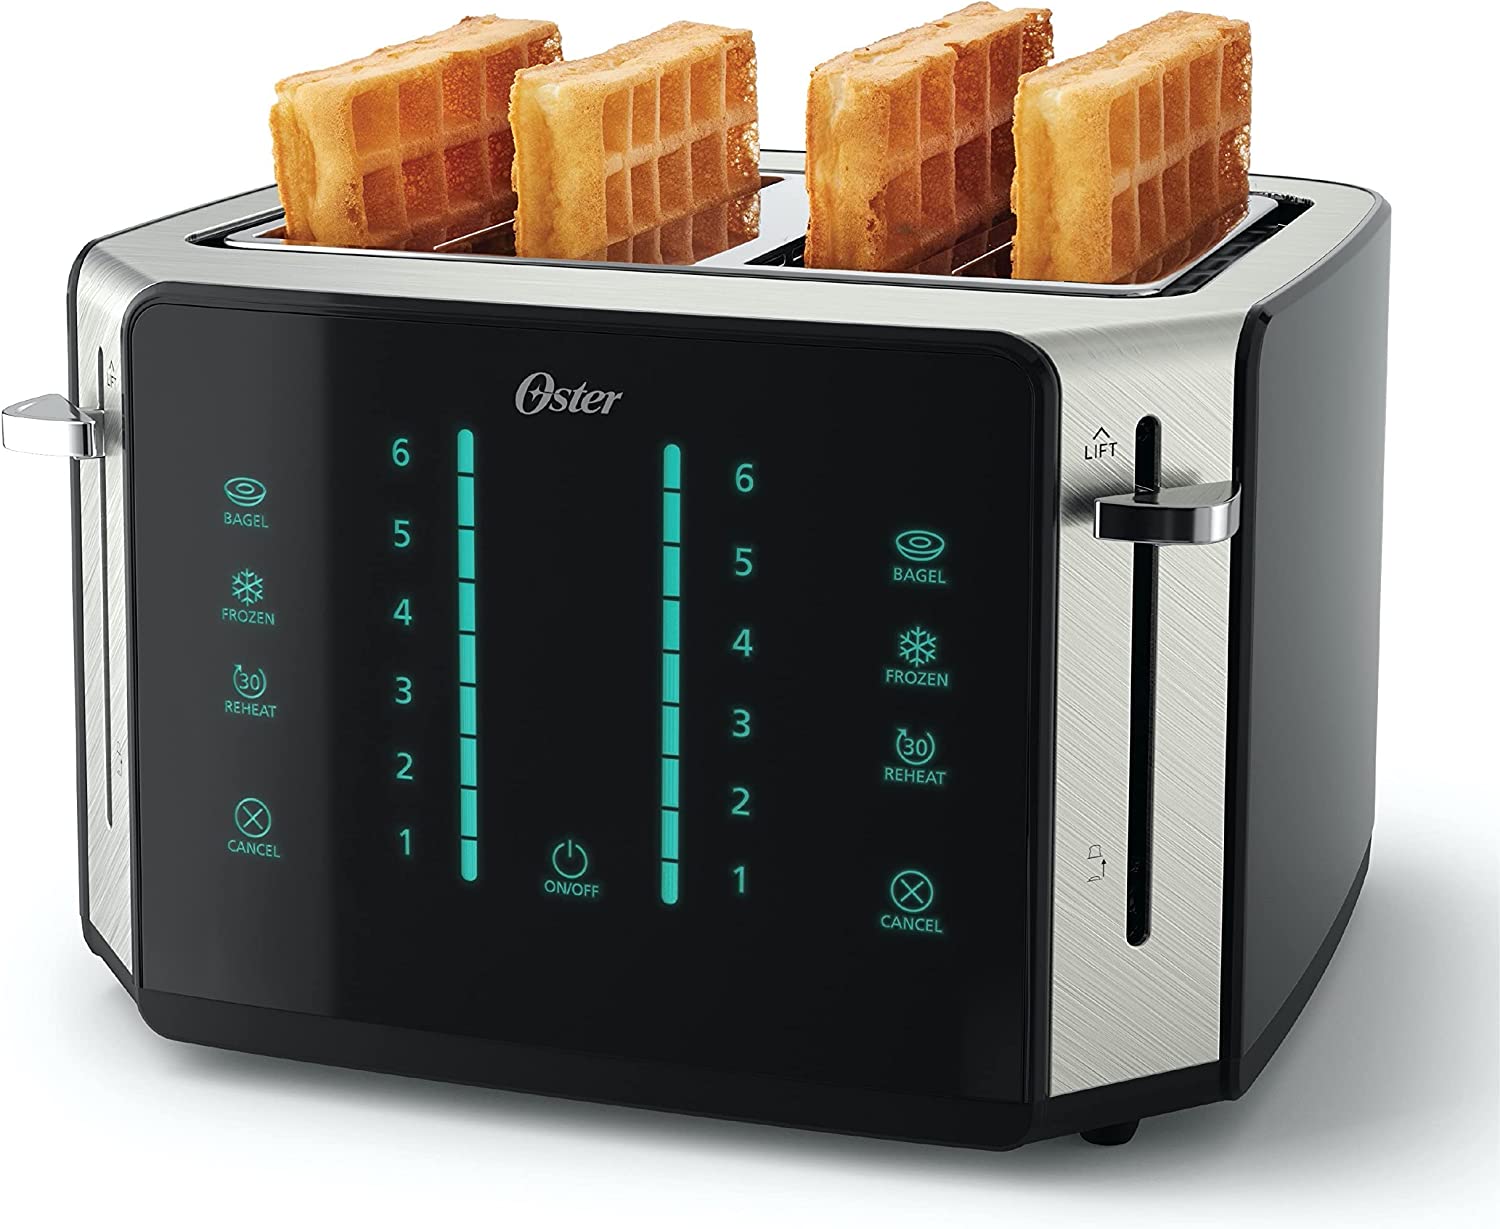 Oster 4-Slice Toaster -  - Black/Stainless Steel